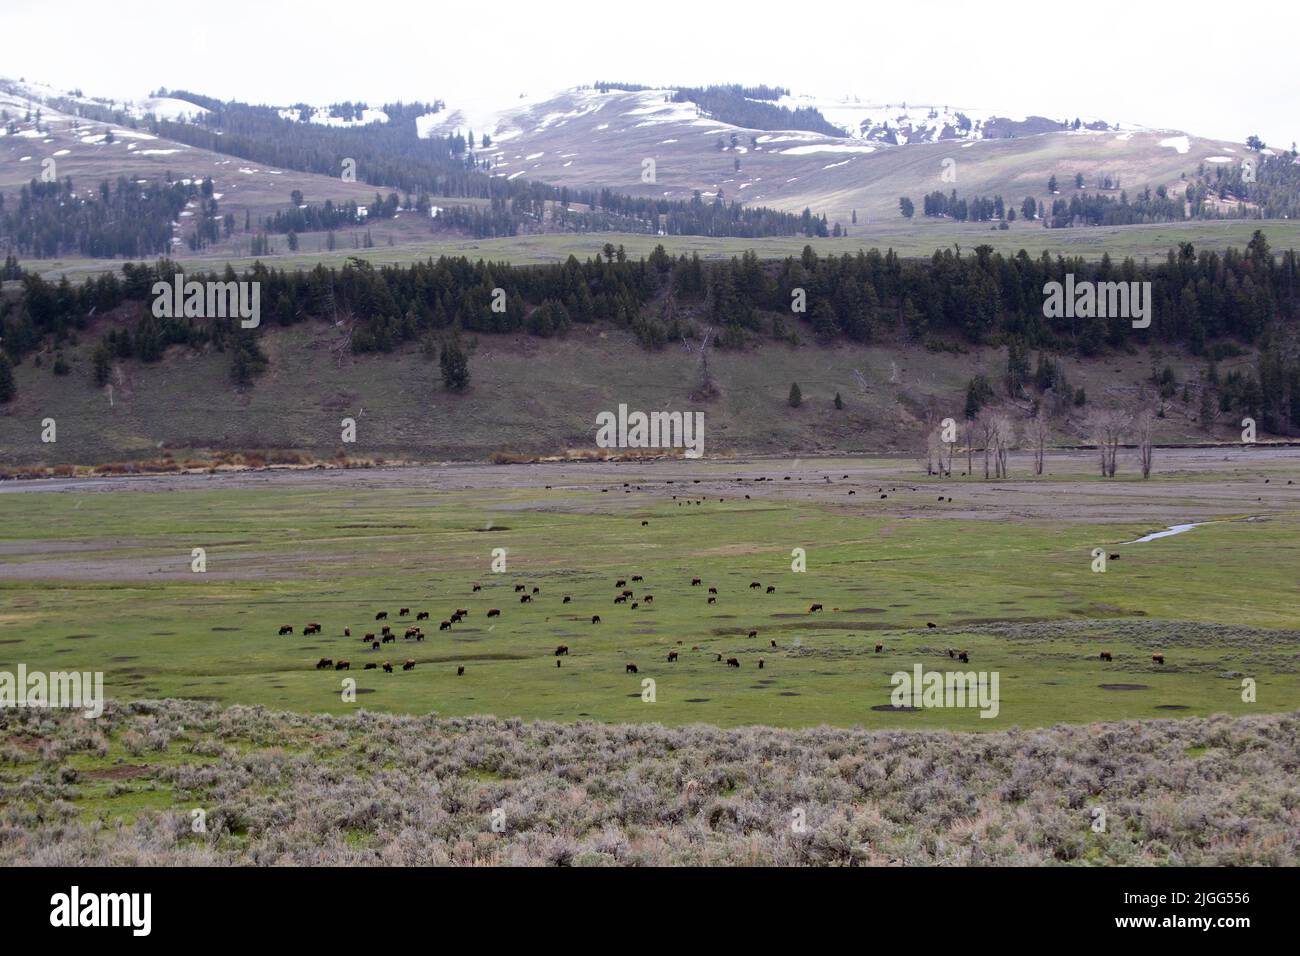 Bison graze in the scenic and snowy Lamar Valley of Yellowstone NP, WY, USA, pre-flooding/park closure, 5/22. Stock Photo